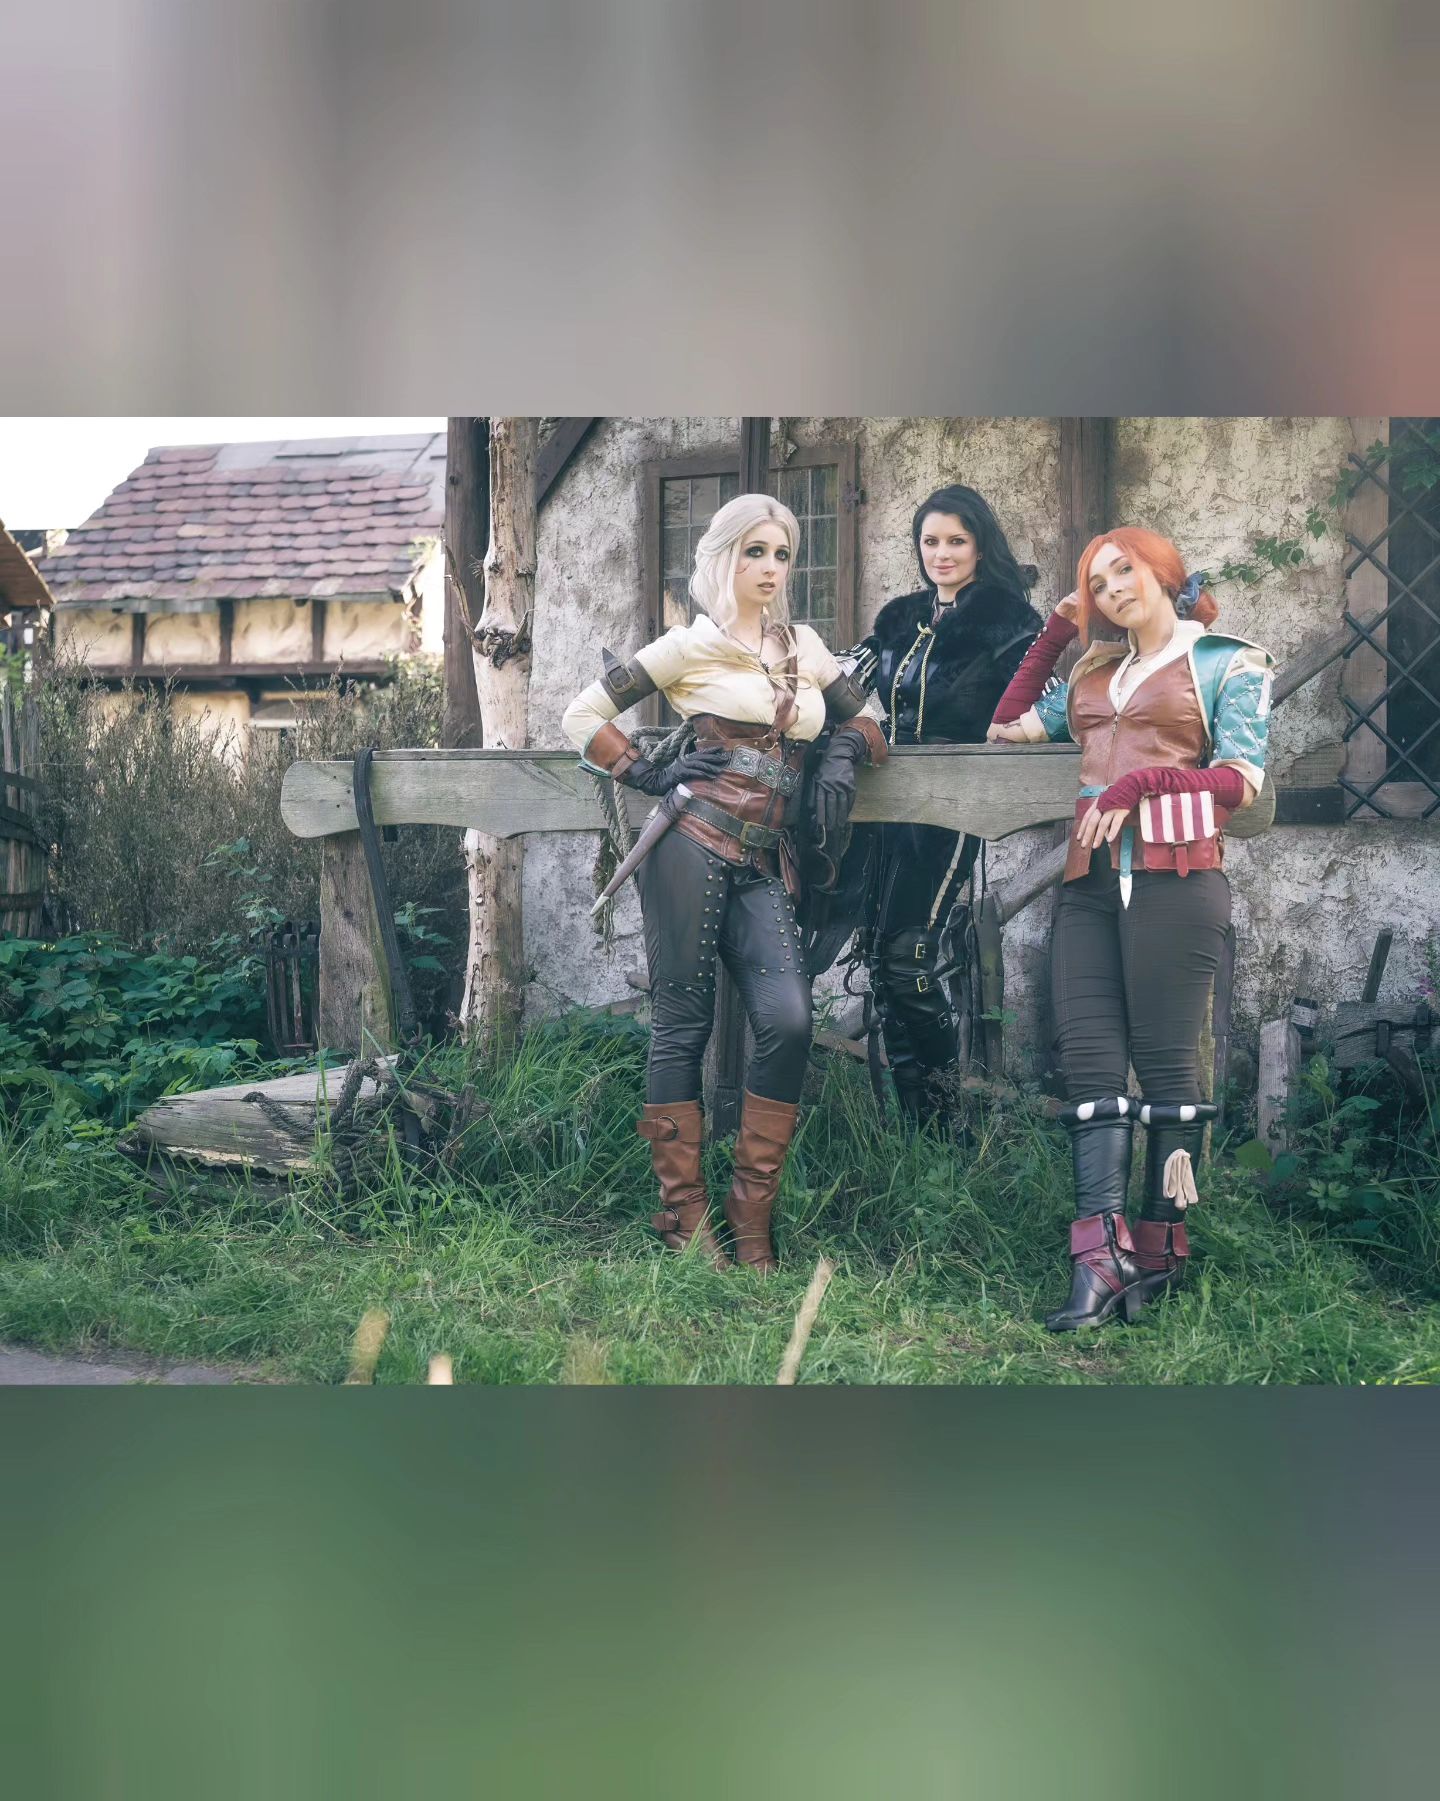 Name a more iconic trio, we're waiting... 

Okay but for real, can we talk about how fantastic this Witcher set turned out? I feel like we all embodied the essence of these characters so well, @alissa_noir is the perfect Yen to me just how @leahobscureofficial is the canon Triss for me🥺 And I tried my best to be their sassy Ciri👀 

As a huge Witcher fan it makes me so happy to be a part of this❤️ The full set (with three different versions) is going to be on OF this month 🥰

#witcher3 #yennefer #triss #ciri #witcher #gaming #gamingcosplay #cosplaygirl